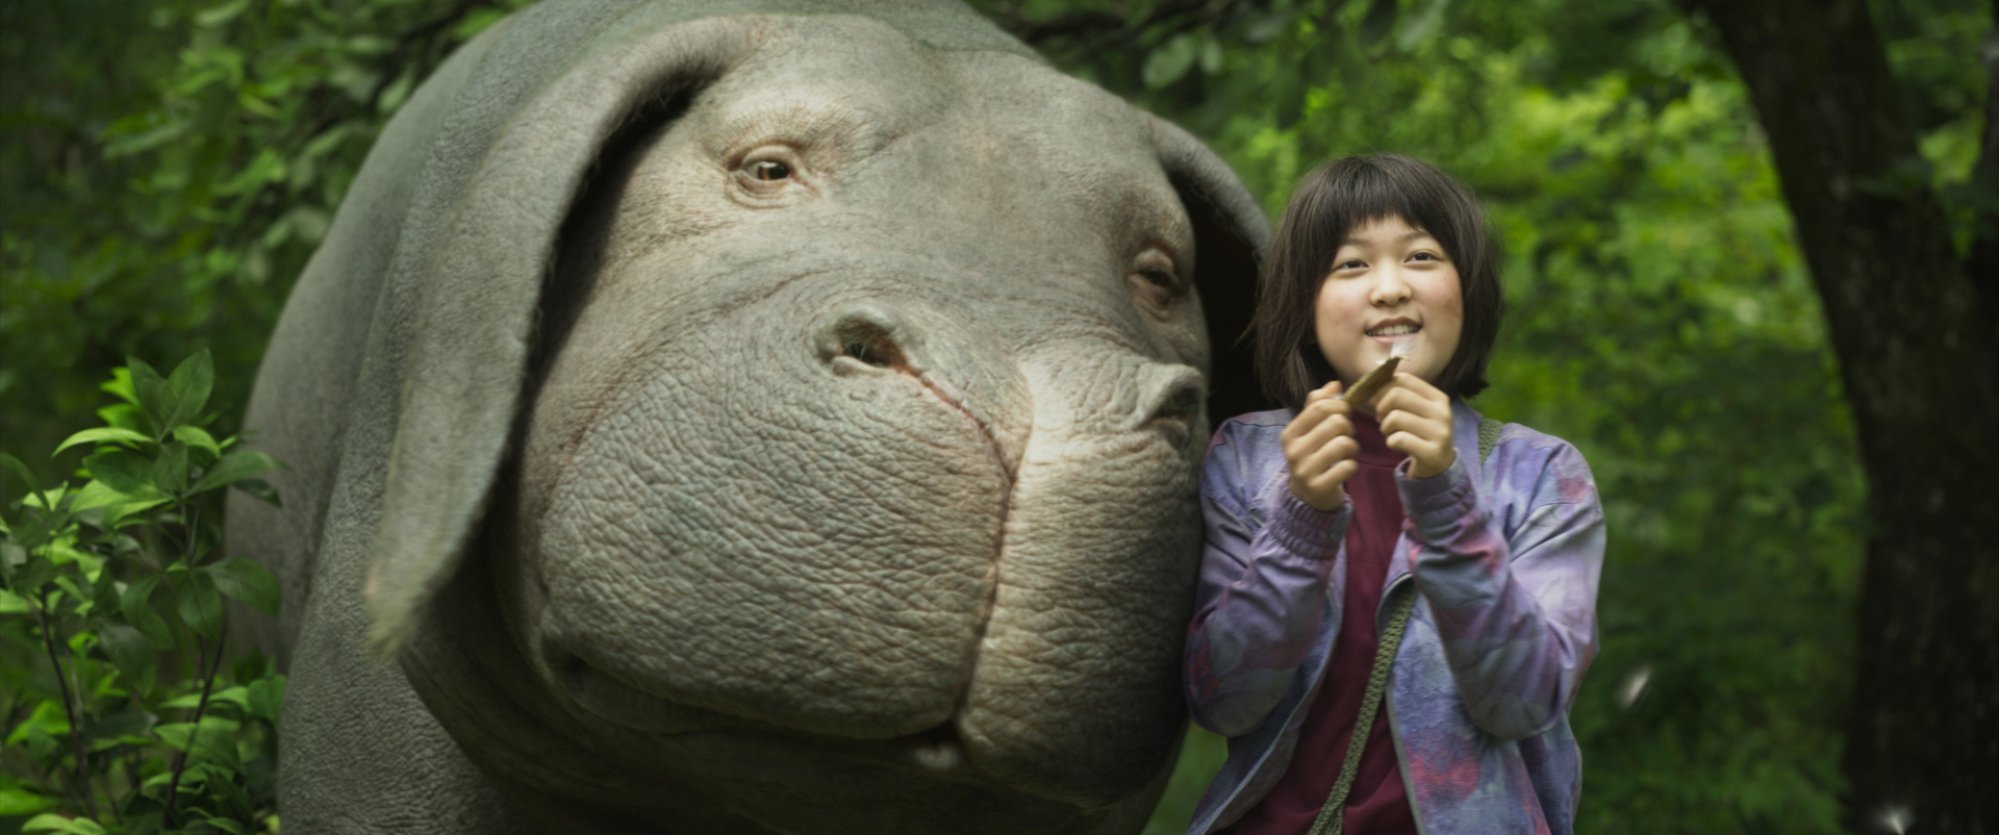 A young Korean girl nuzzling a gigantic pig; still from "Okja."